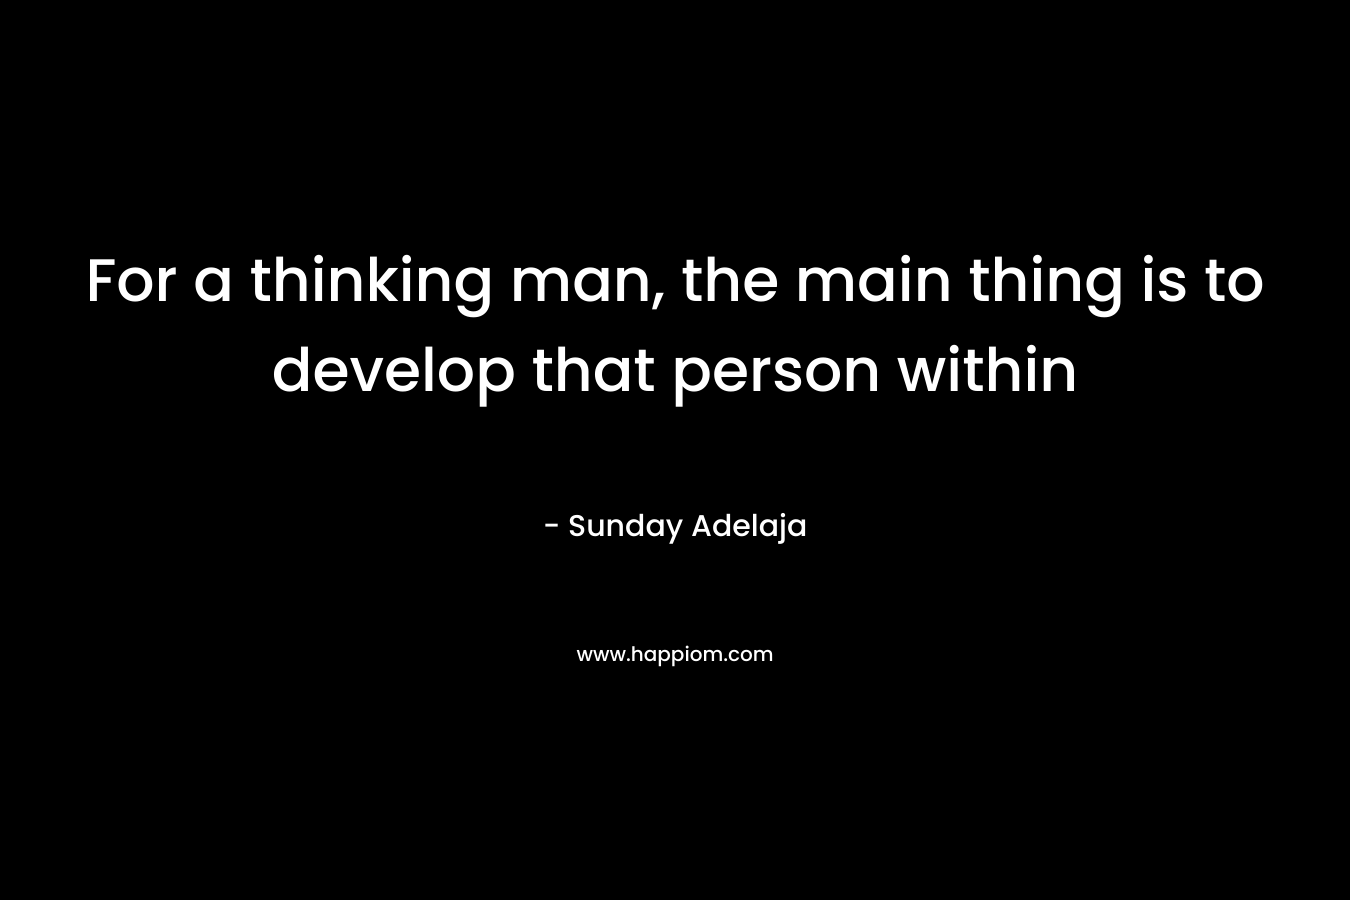 For a thinking man, the main thing is to develop that person within